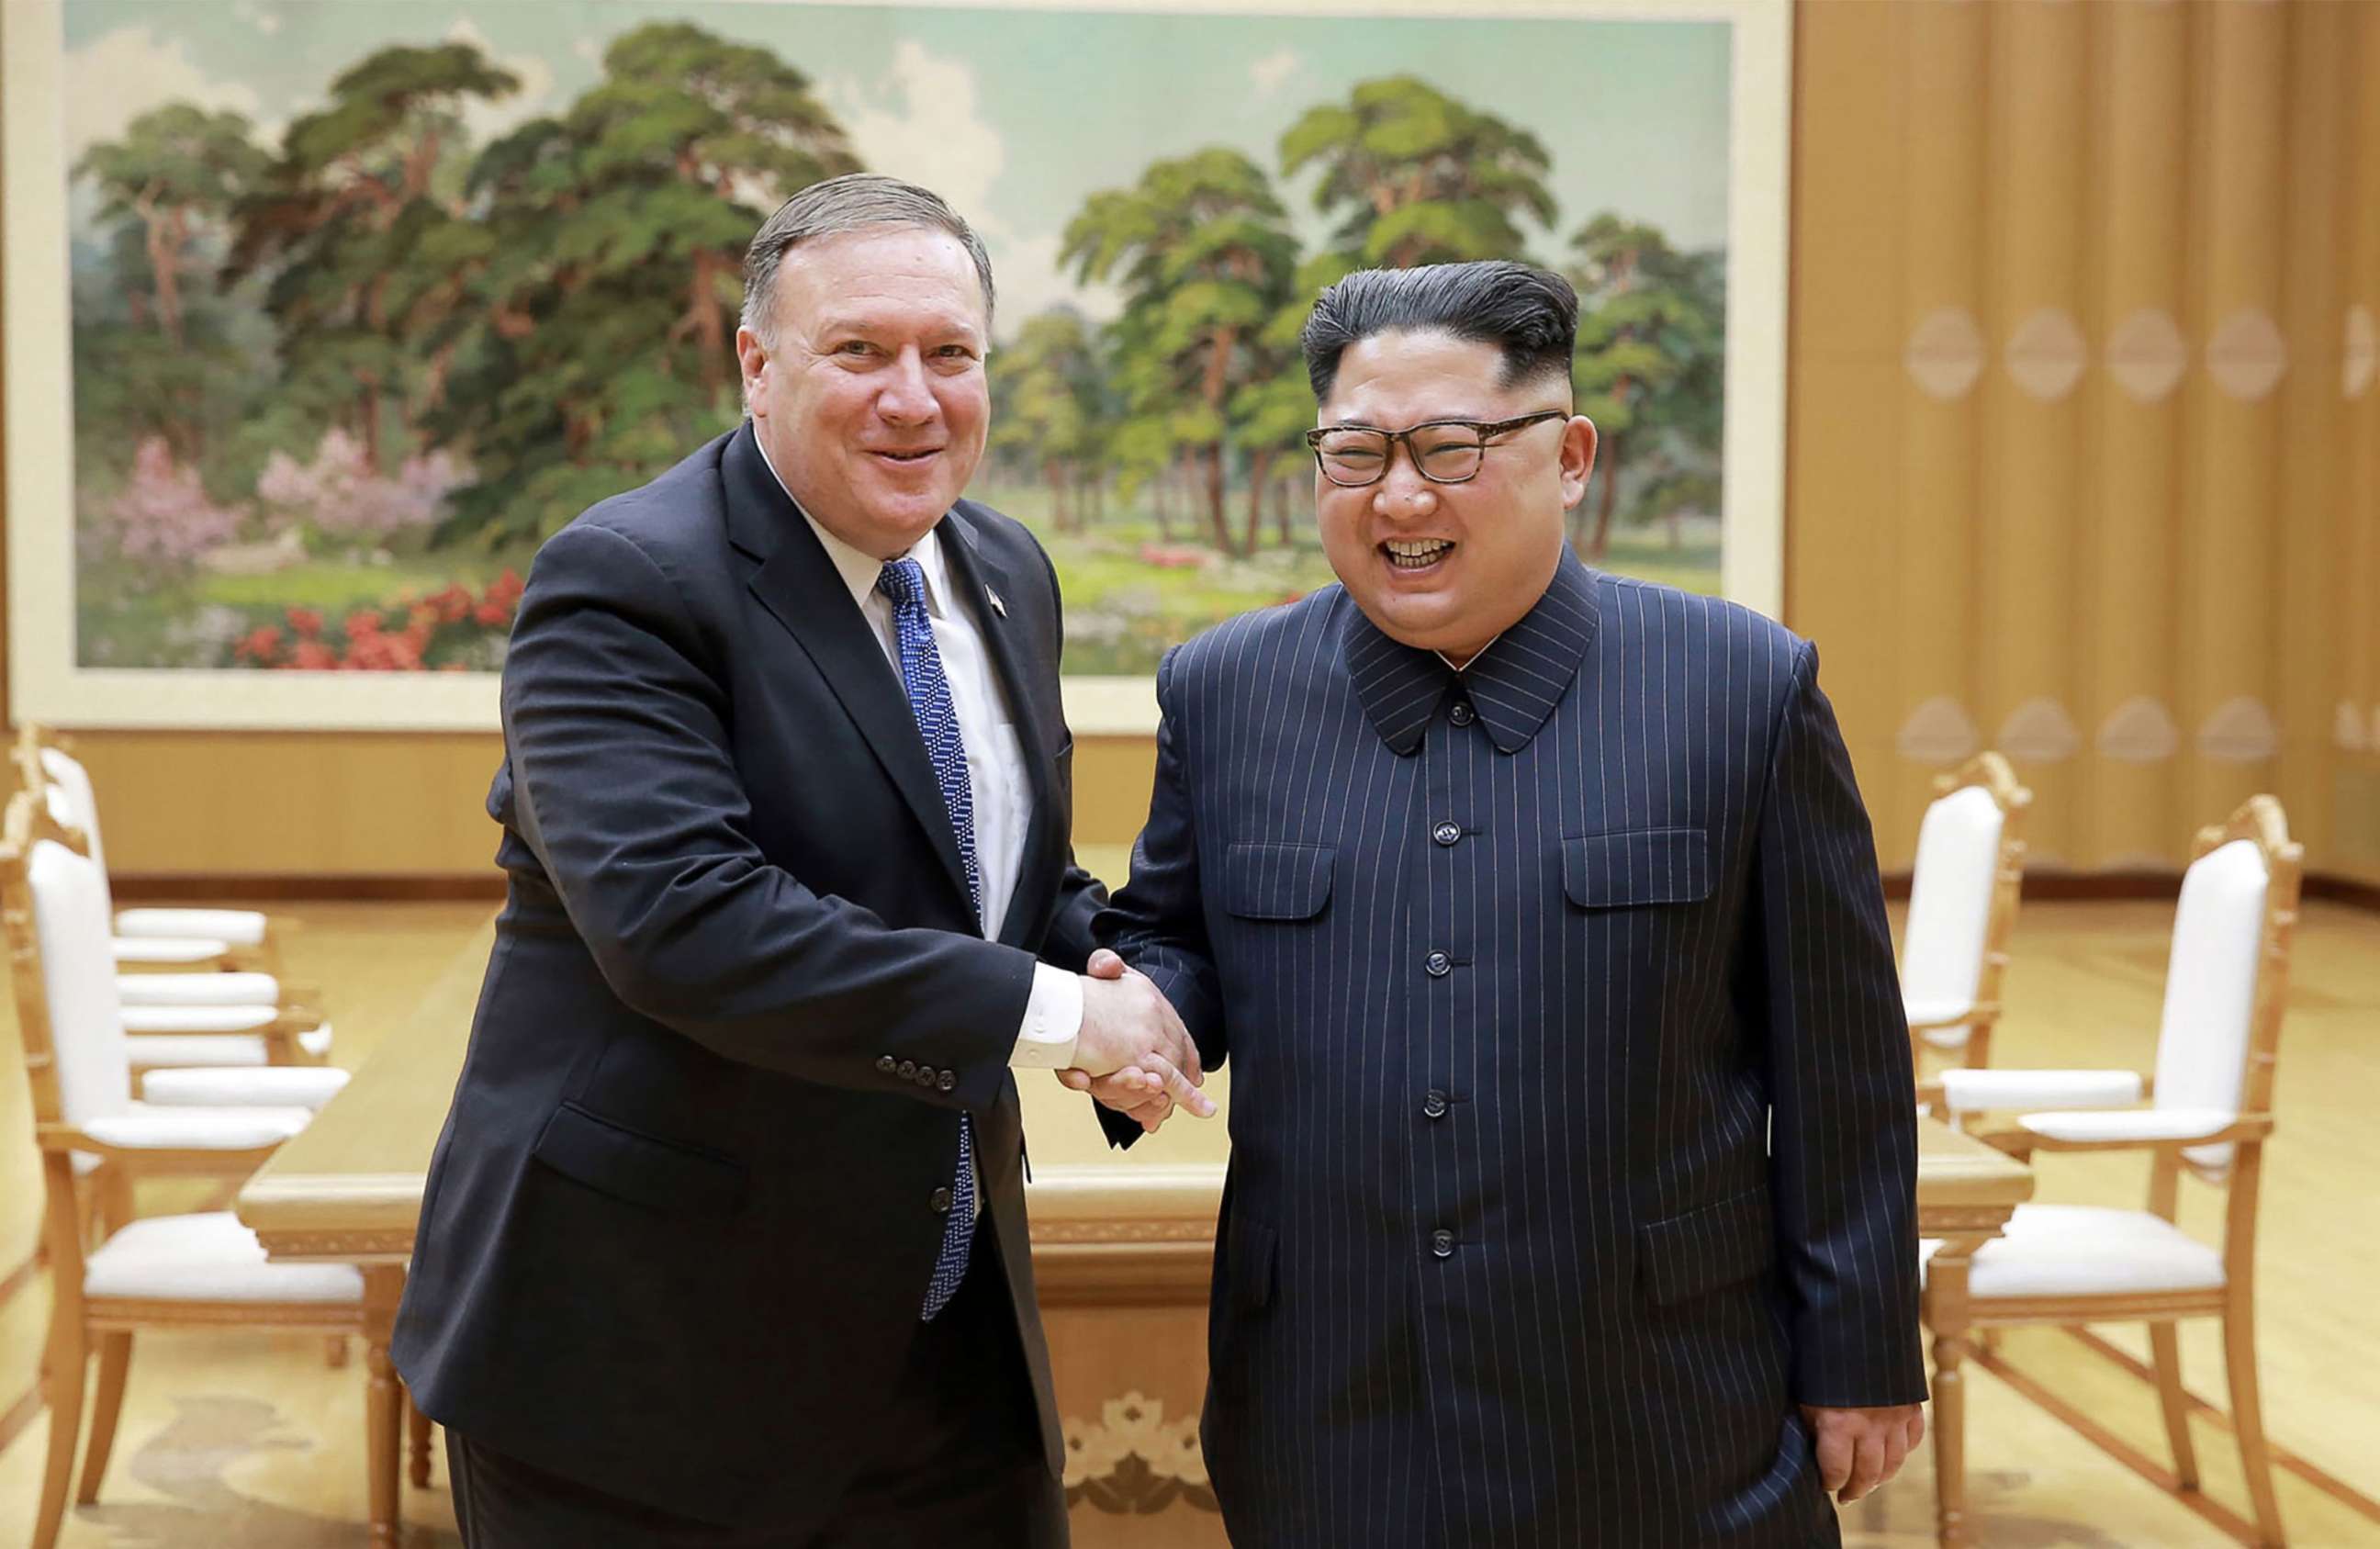 PHOTO: North Korean leader Kim Jong Un and US Secretary of State Mike Pompeo shaking hands at the Workers' Party of Korea headquarters in Pyongyang, North Korea, May 8, 2018.